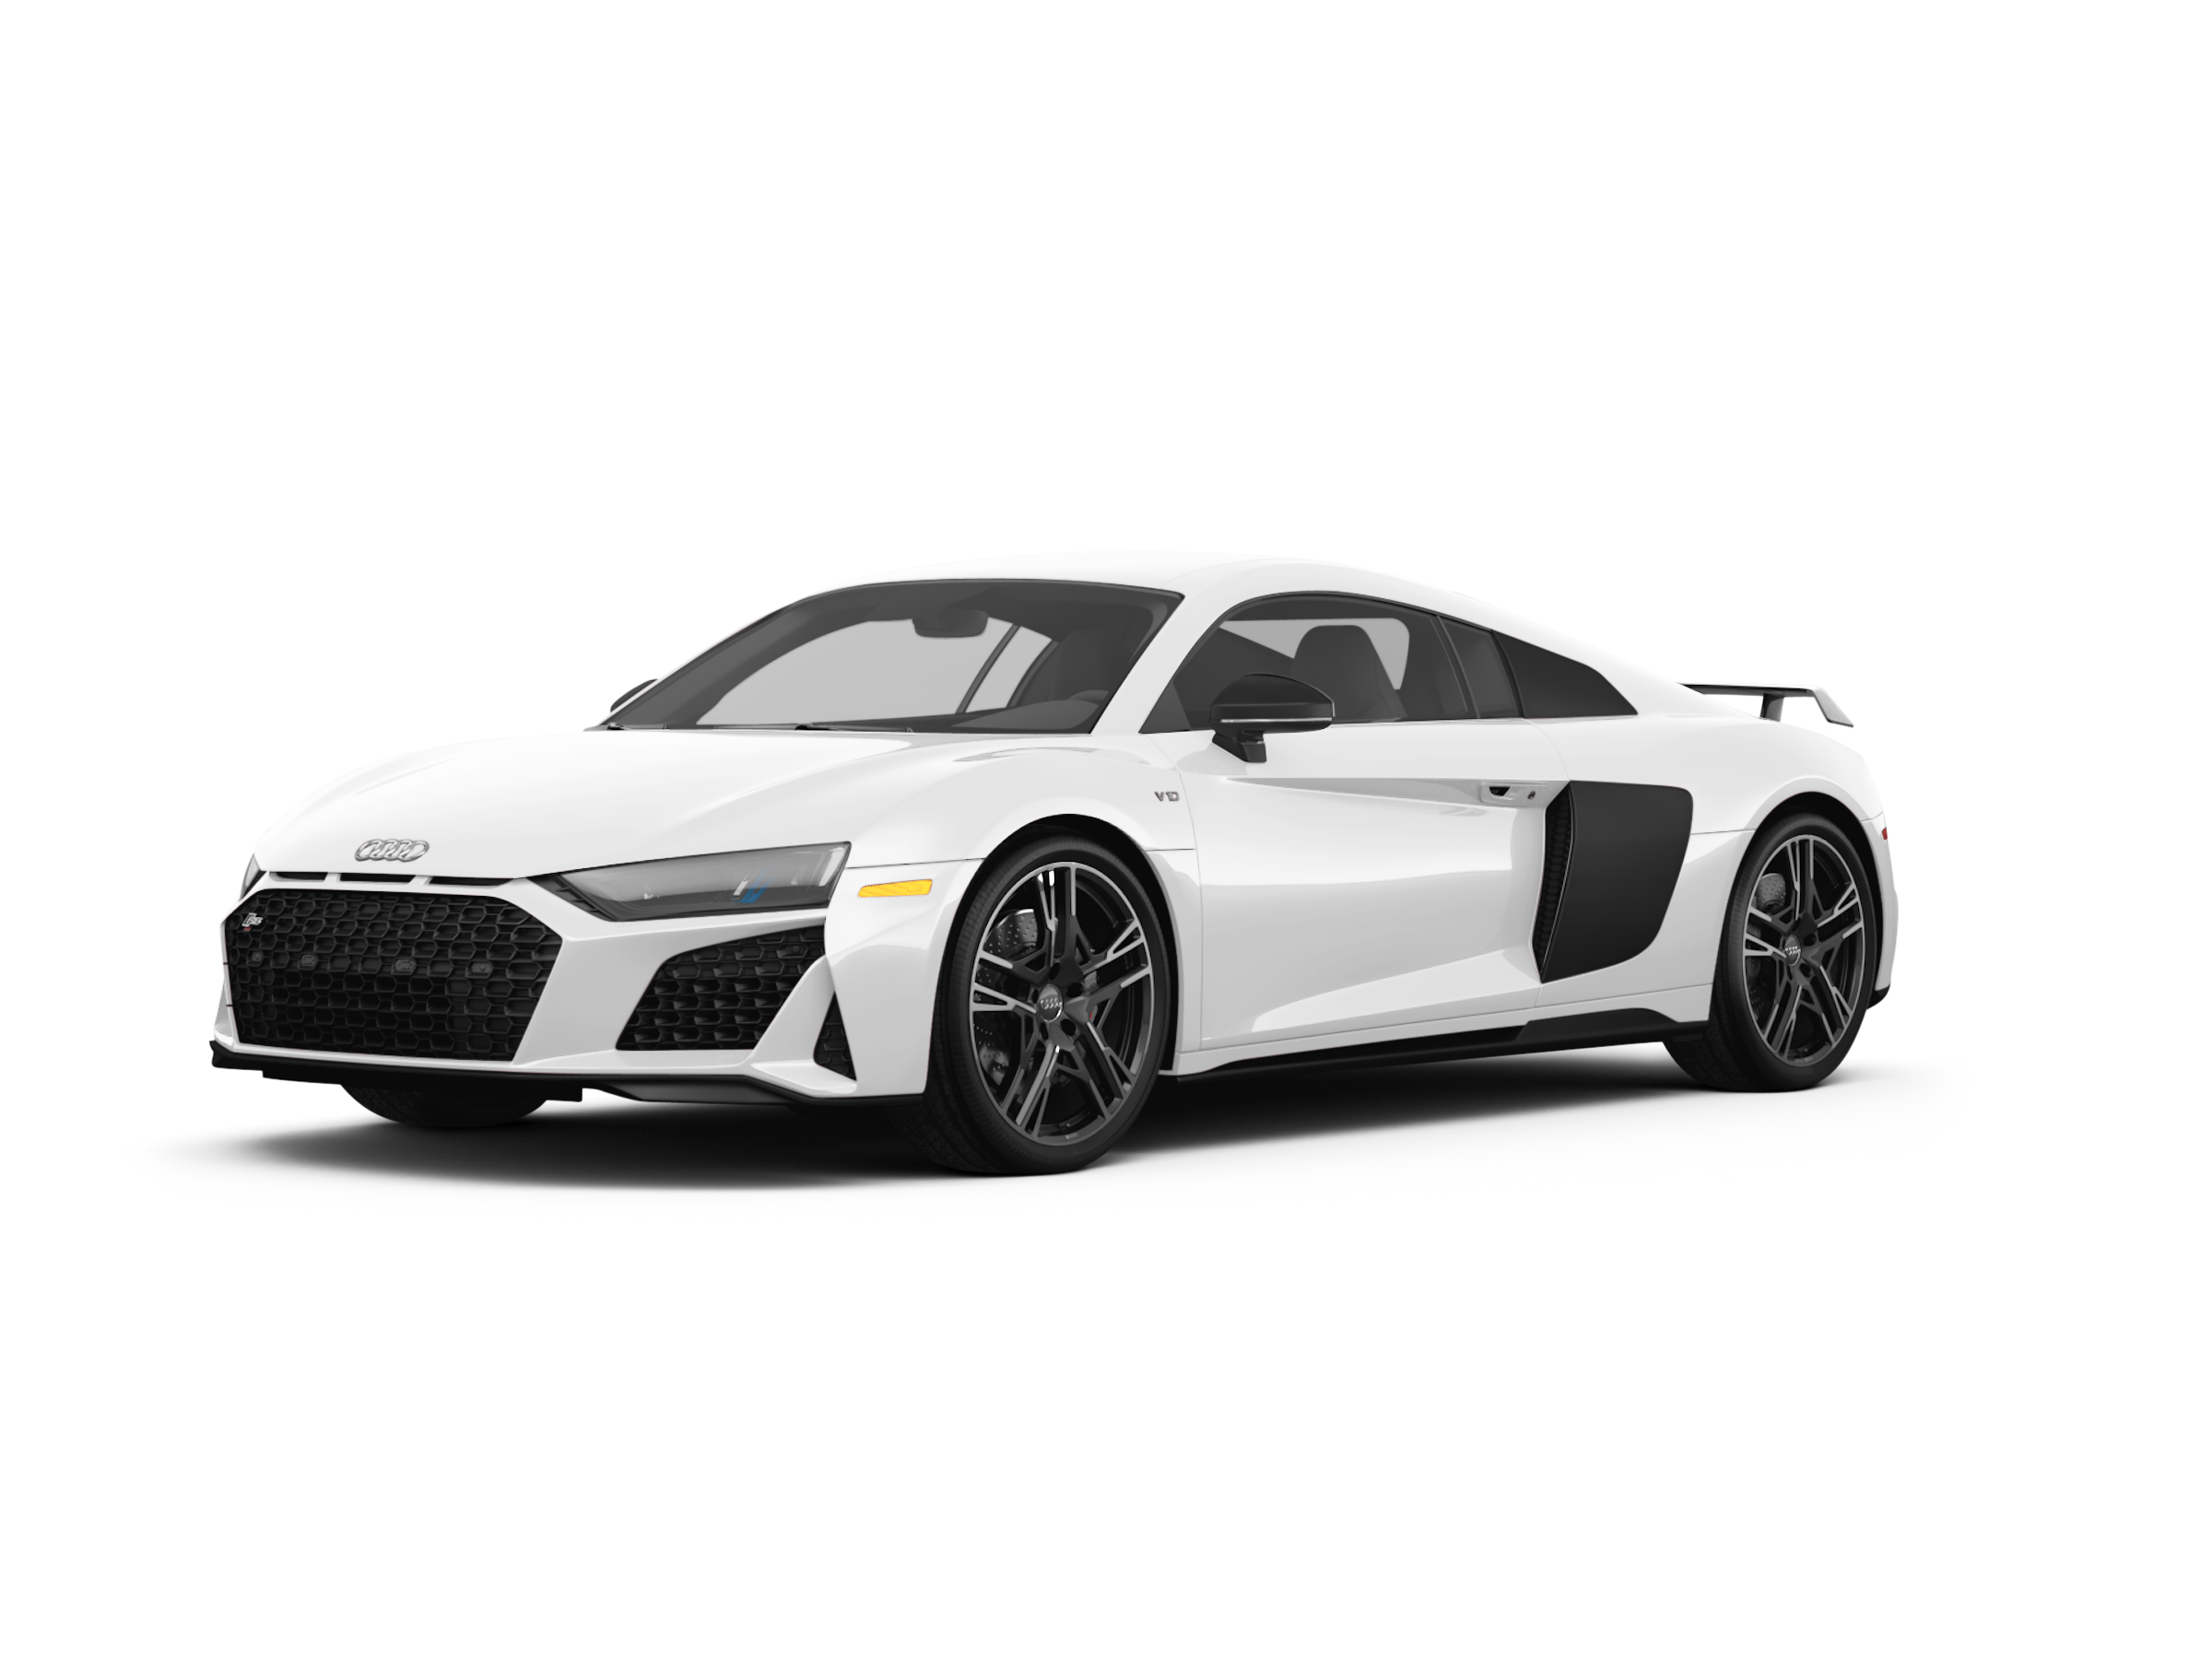 2023 Audi R8 Prices, Reviews, and Photos - MotorTrend